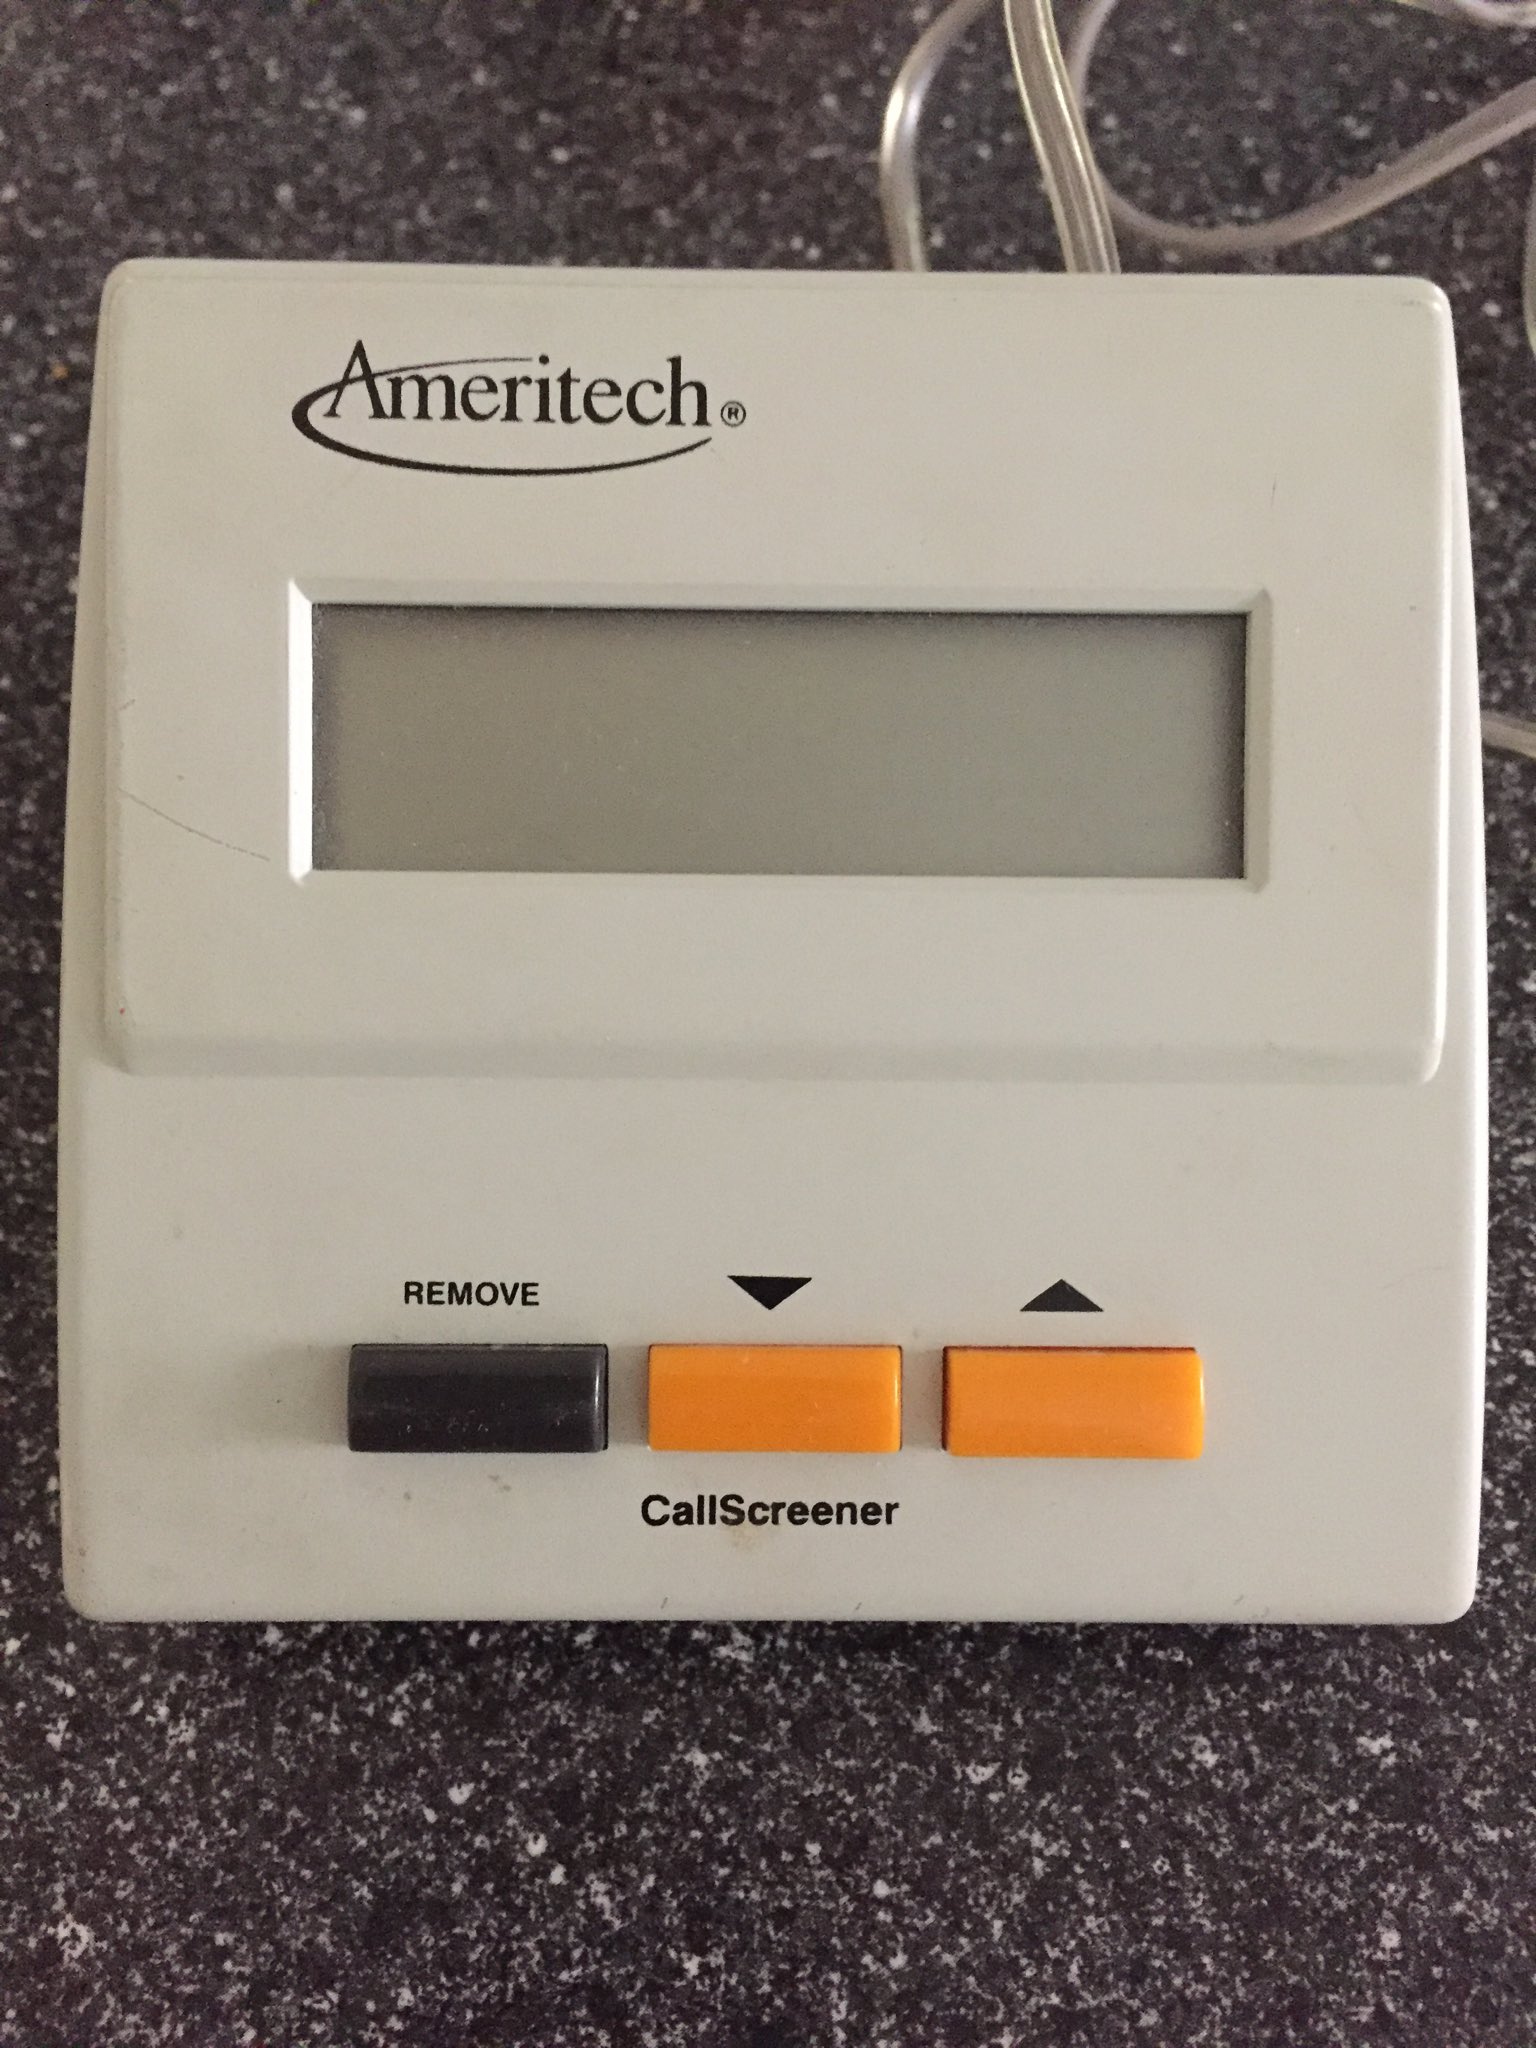 Paul Oestreicher on X: Our caller ID box - 1990's. #Tbt #ThrowbackThursday   / X